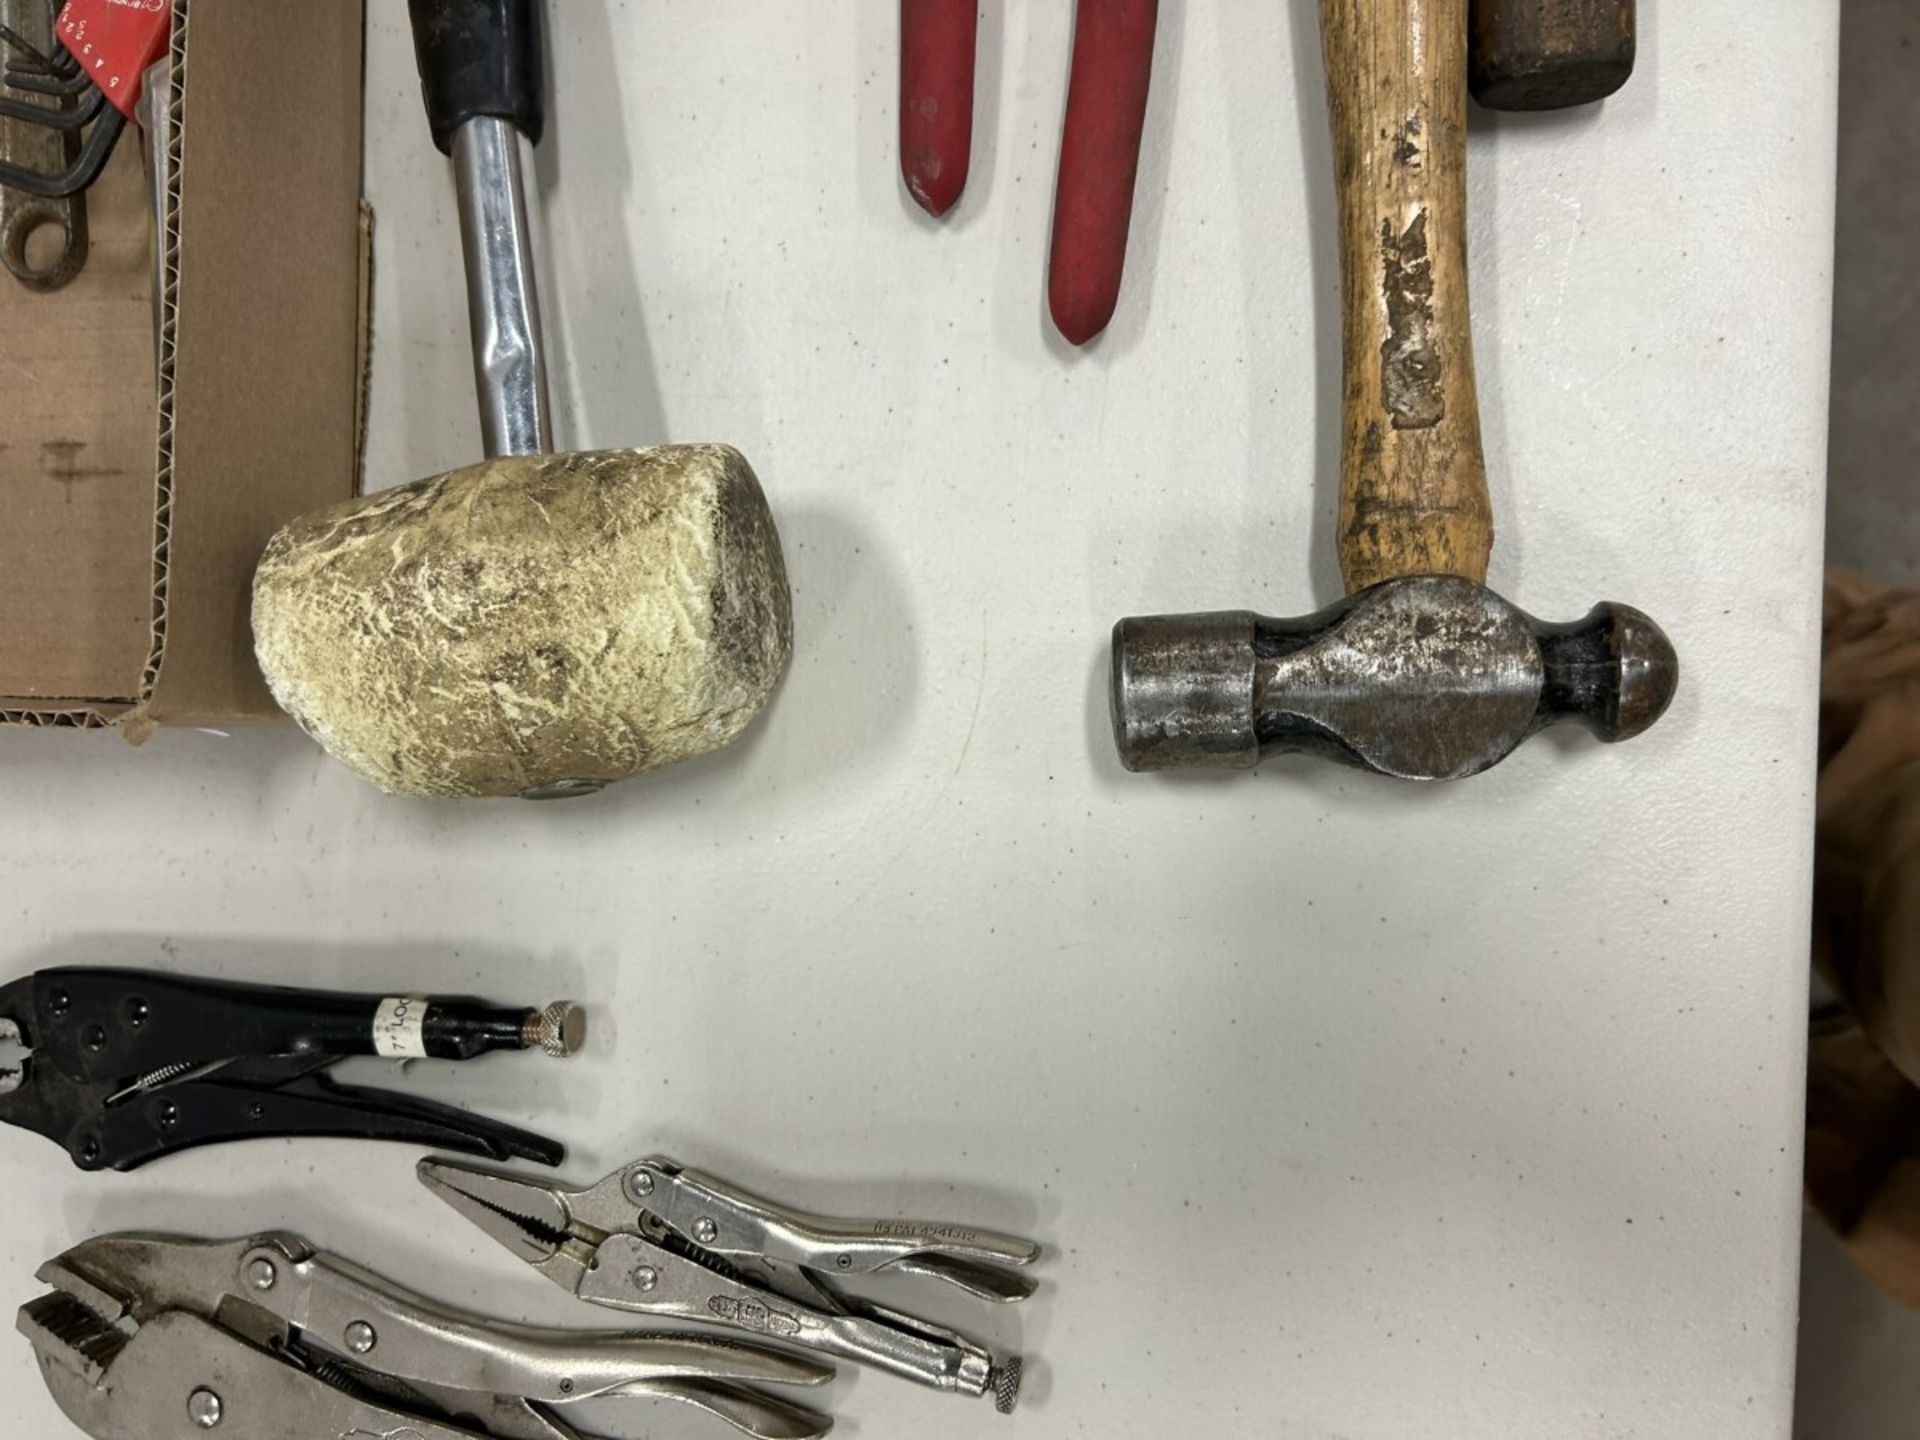 L/O ASSORTED HAND TOOLS -RUBBER MALLET, HAMMERS ,VICE GRIPS, PRY BARS, ETC. - Image 3 of 5